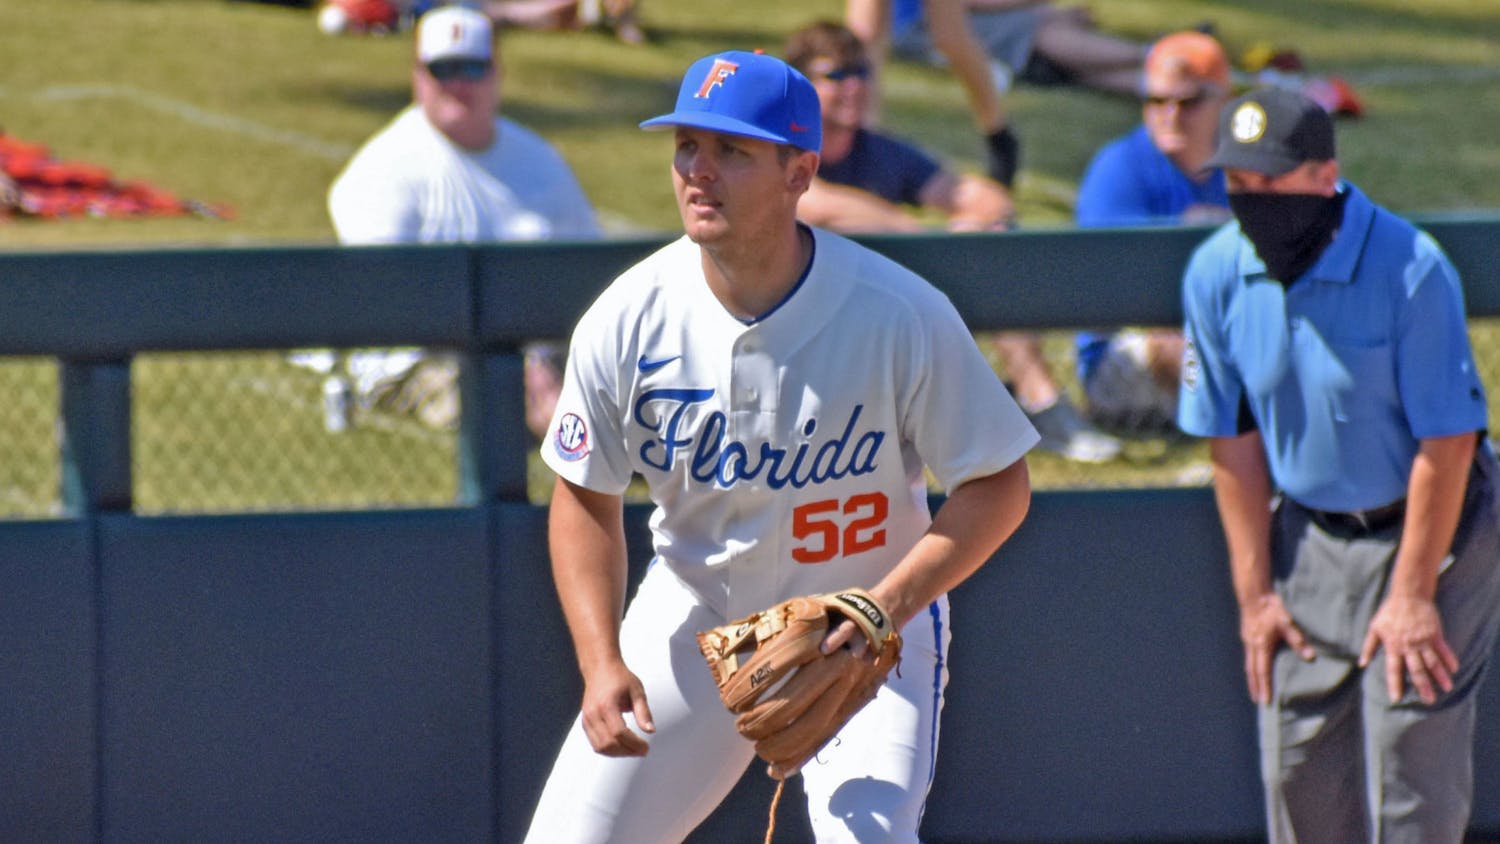 Third baseman Kirby McMullen in the infield against Jacksonville on March 14.